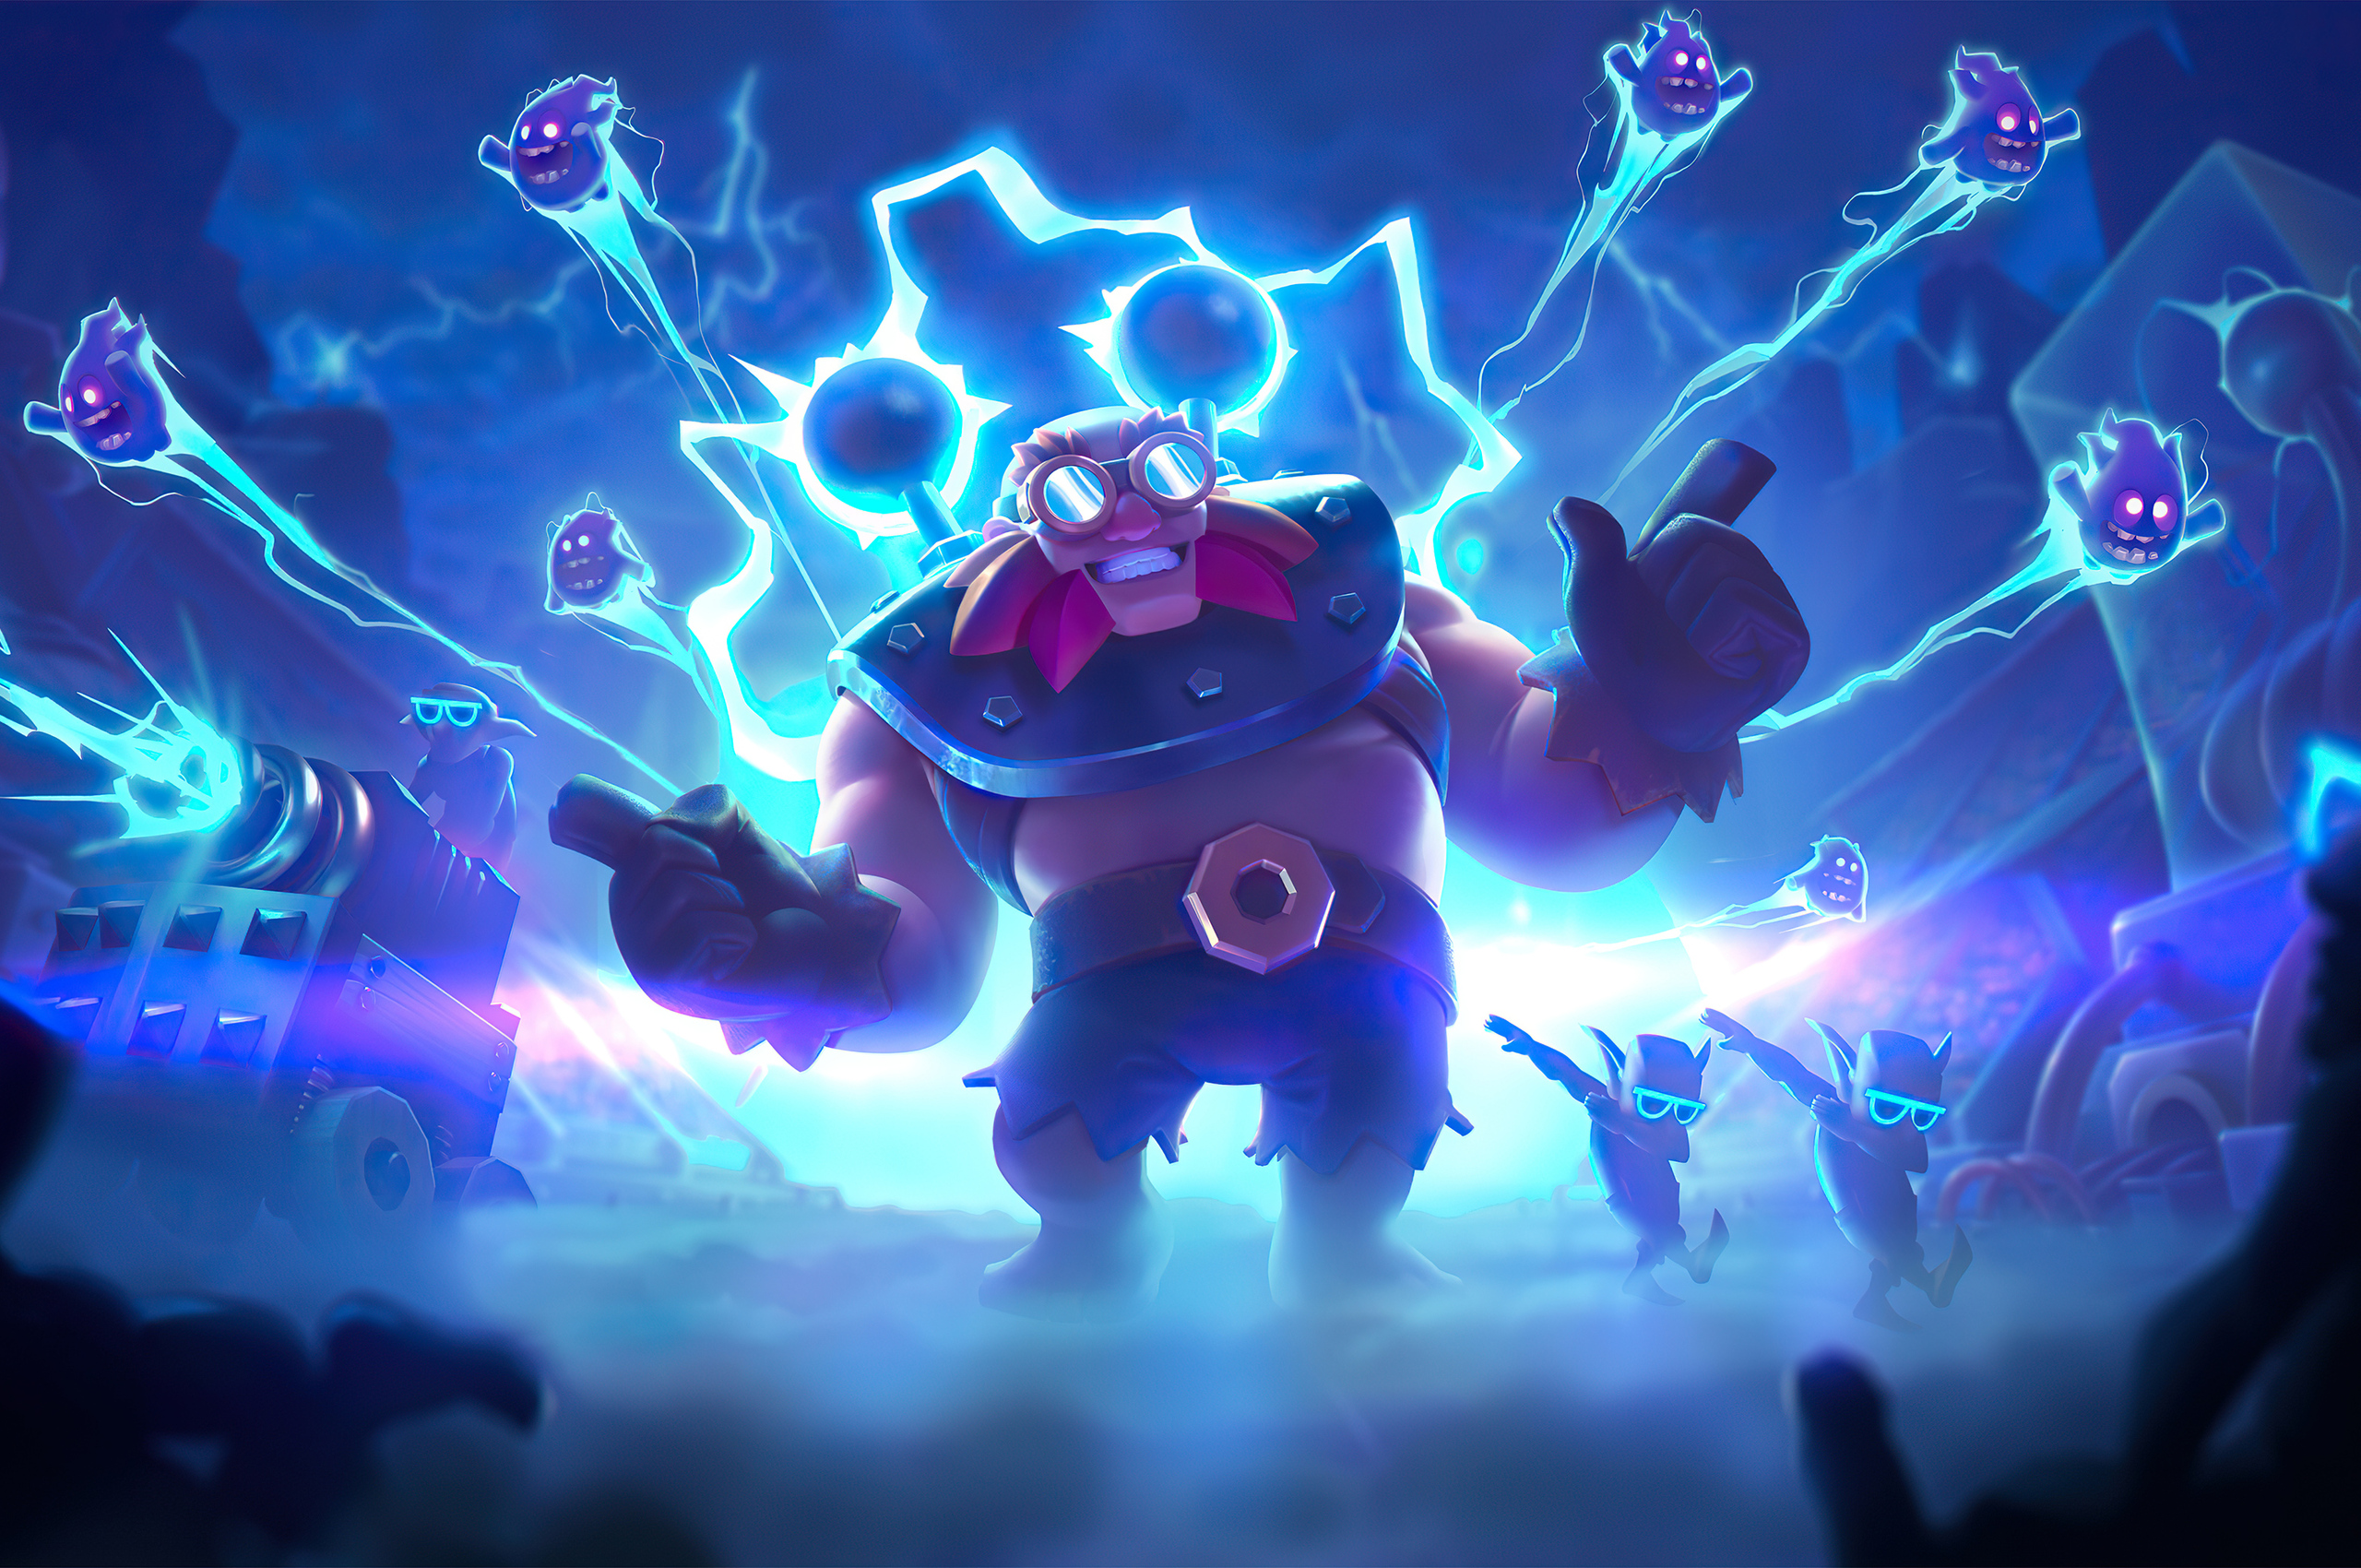 2016-games-wallpapers. clash-royale-wallpapers. games-wallpapers. hd-wallpa...